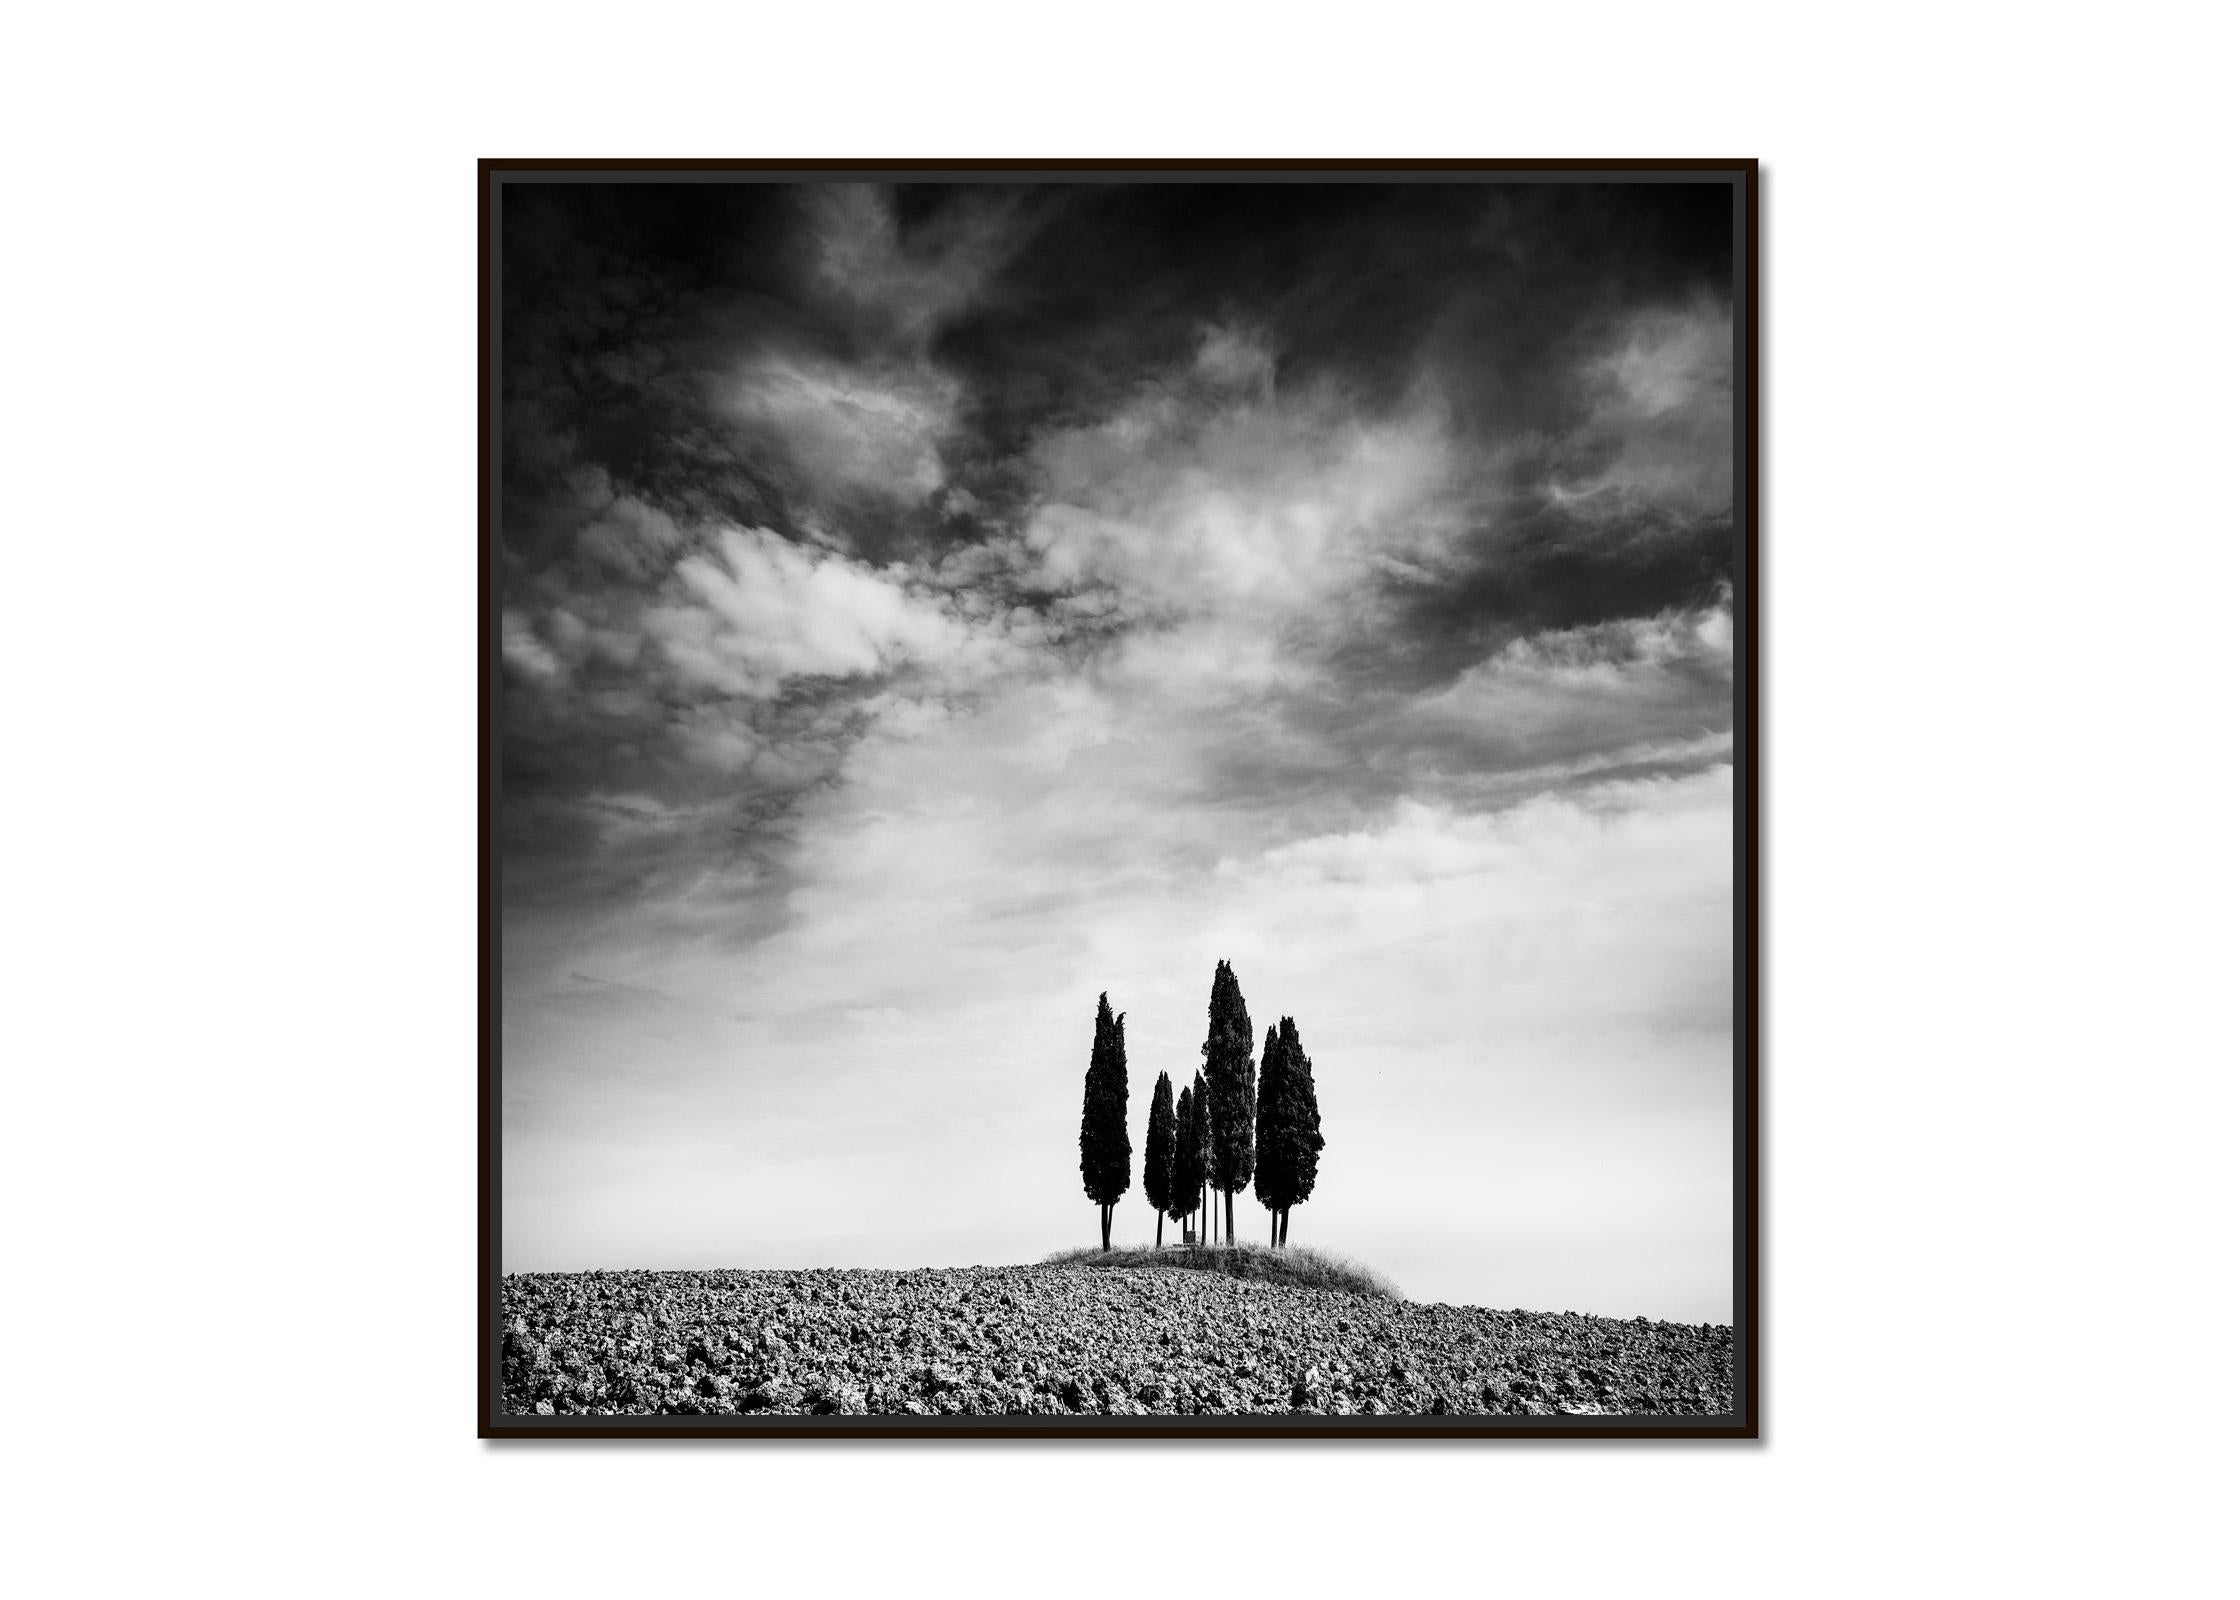 Circle of Cypress Trees, Tuscany, black and white landscape photography  - Photograph by Gerald Berghammer